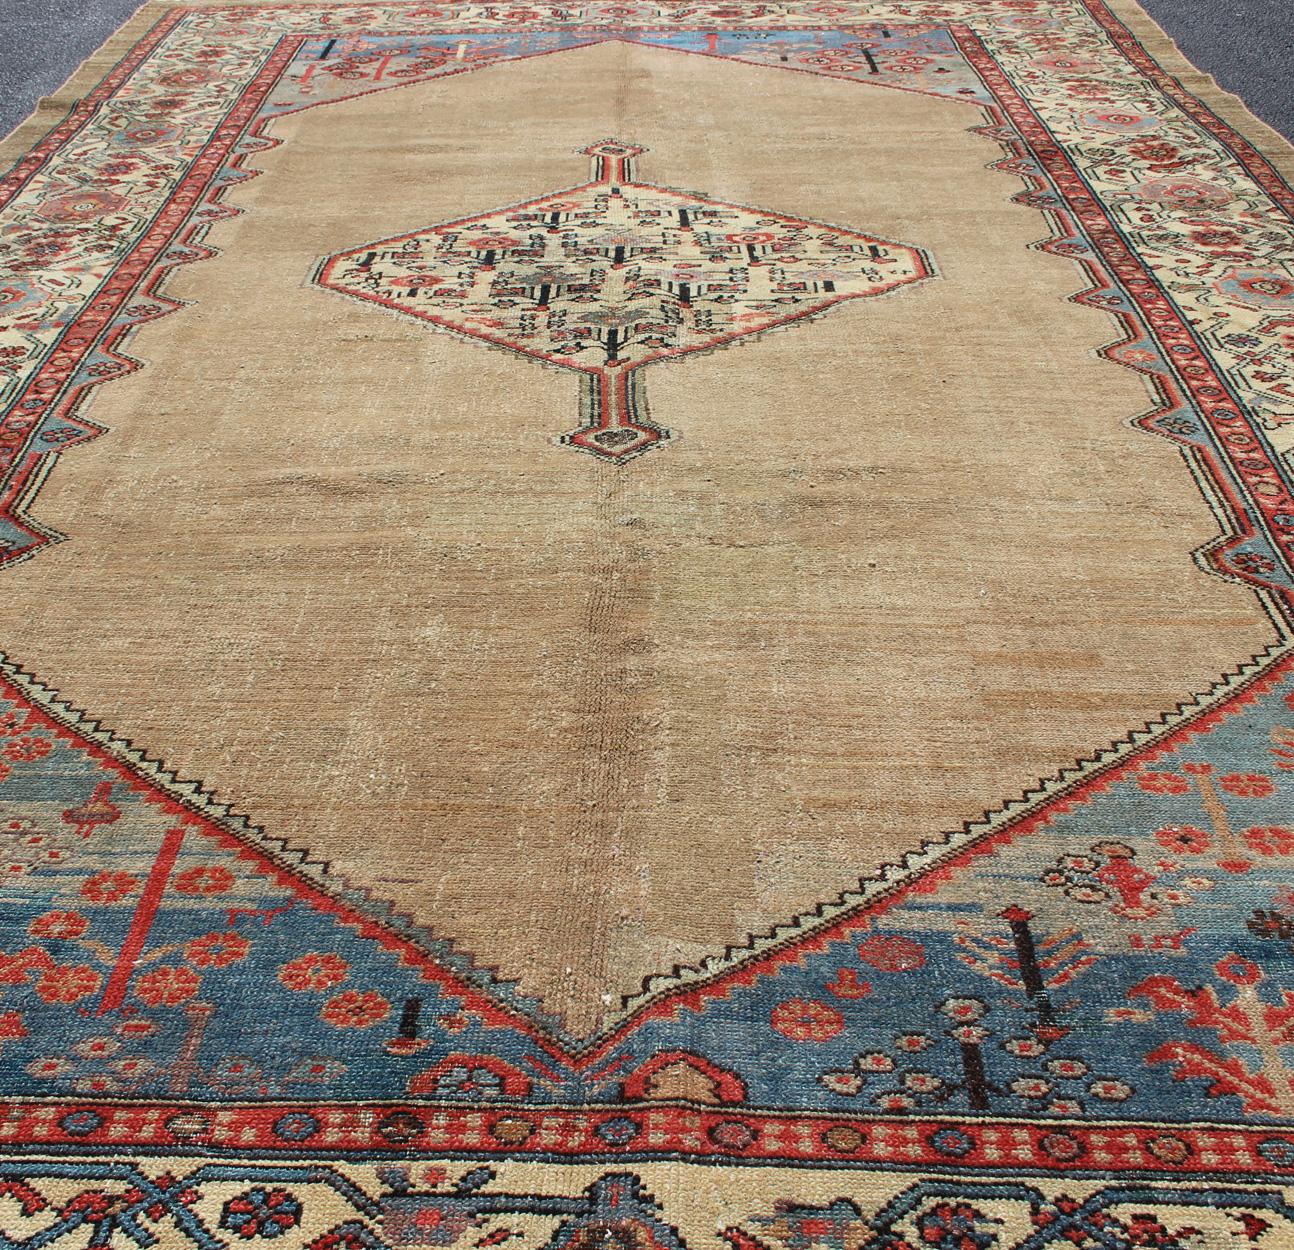 Camel Hair Antique Persian Serab Rug in Camel Color Background, Blue, Salmon  For Sale 5